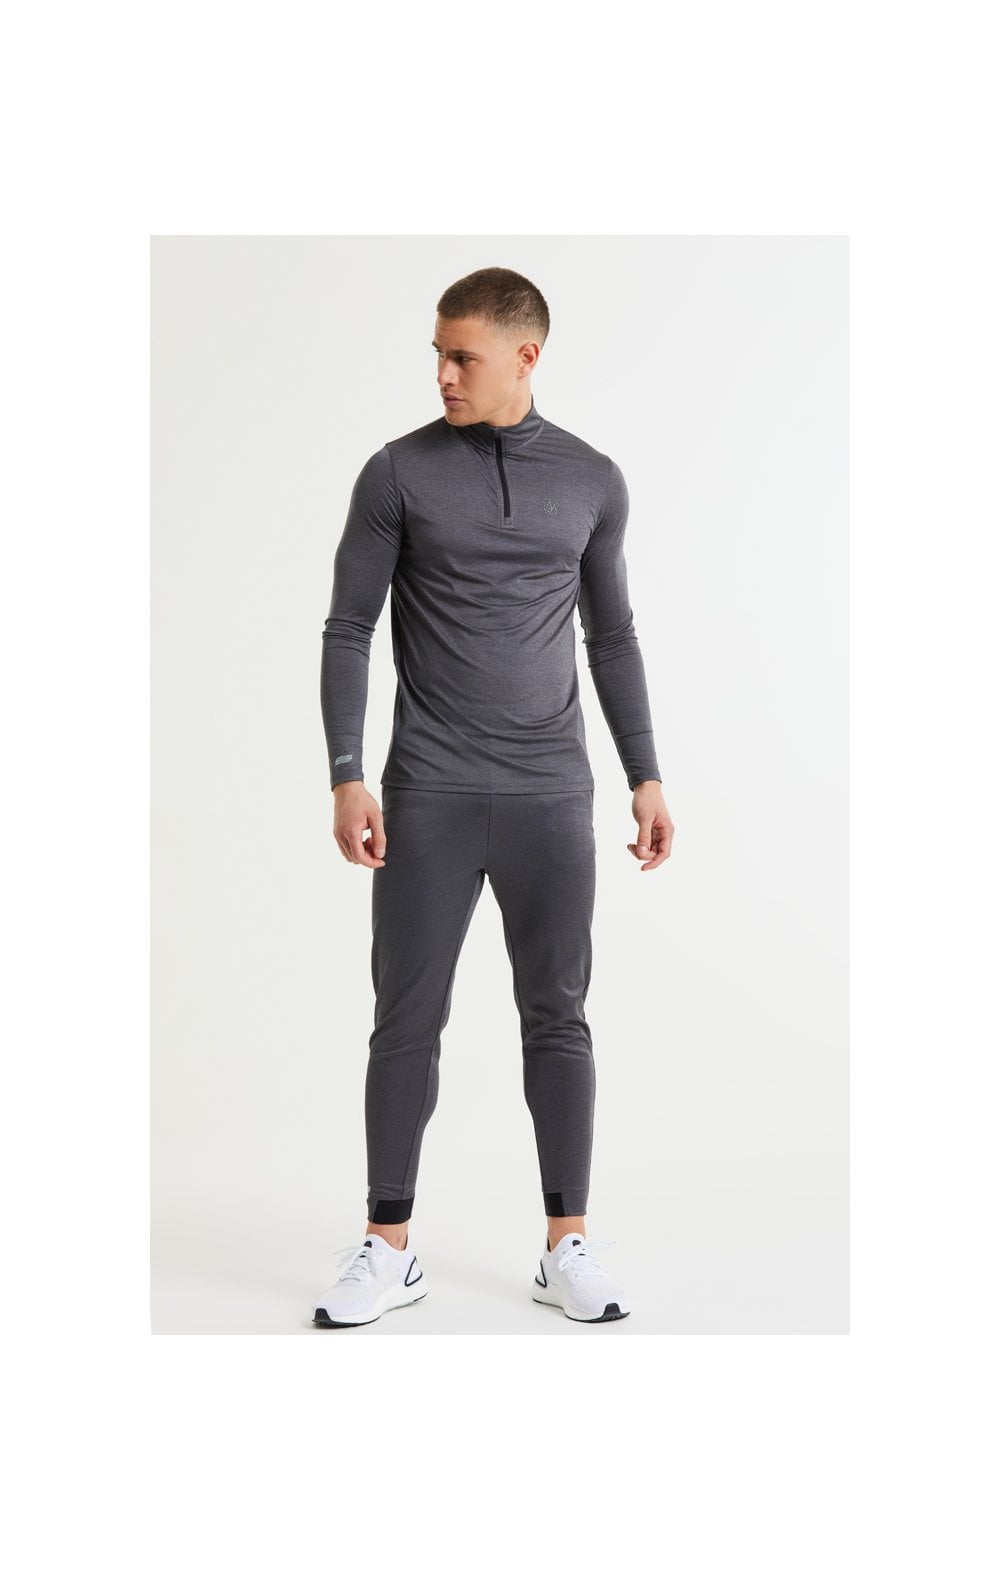 Load image into Gallery viewer, SikSilk Pressure Zip Funnel Neck - Charcoal Marl (4)